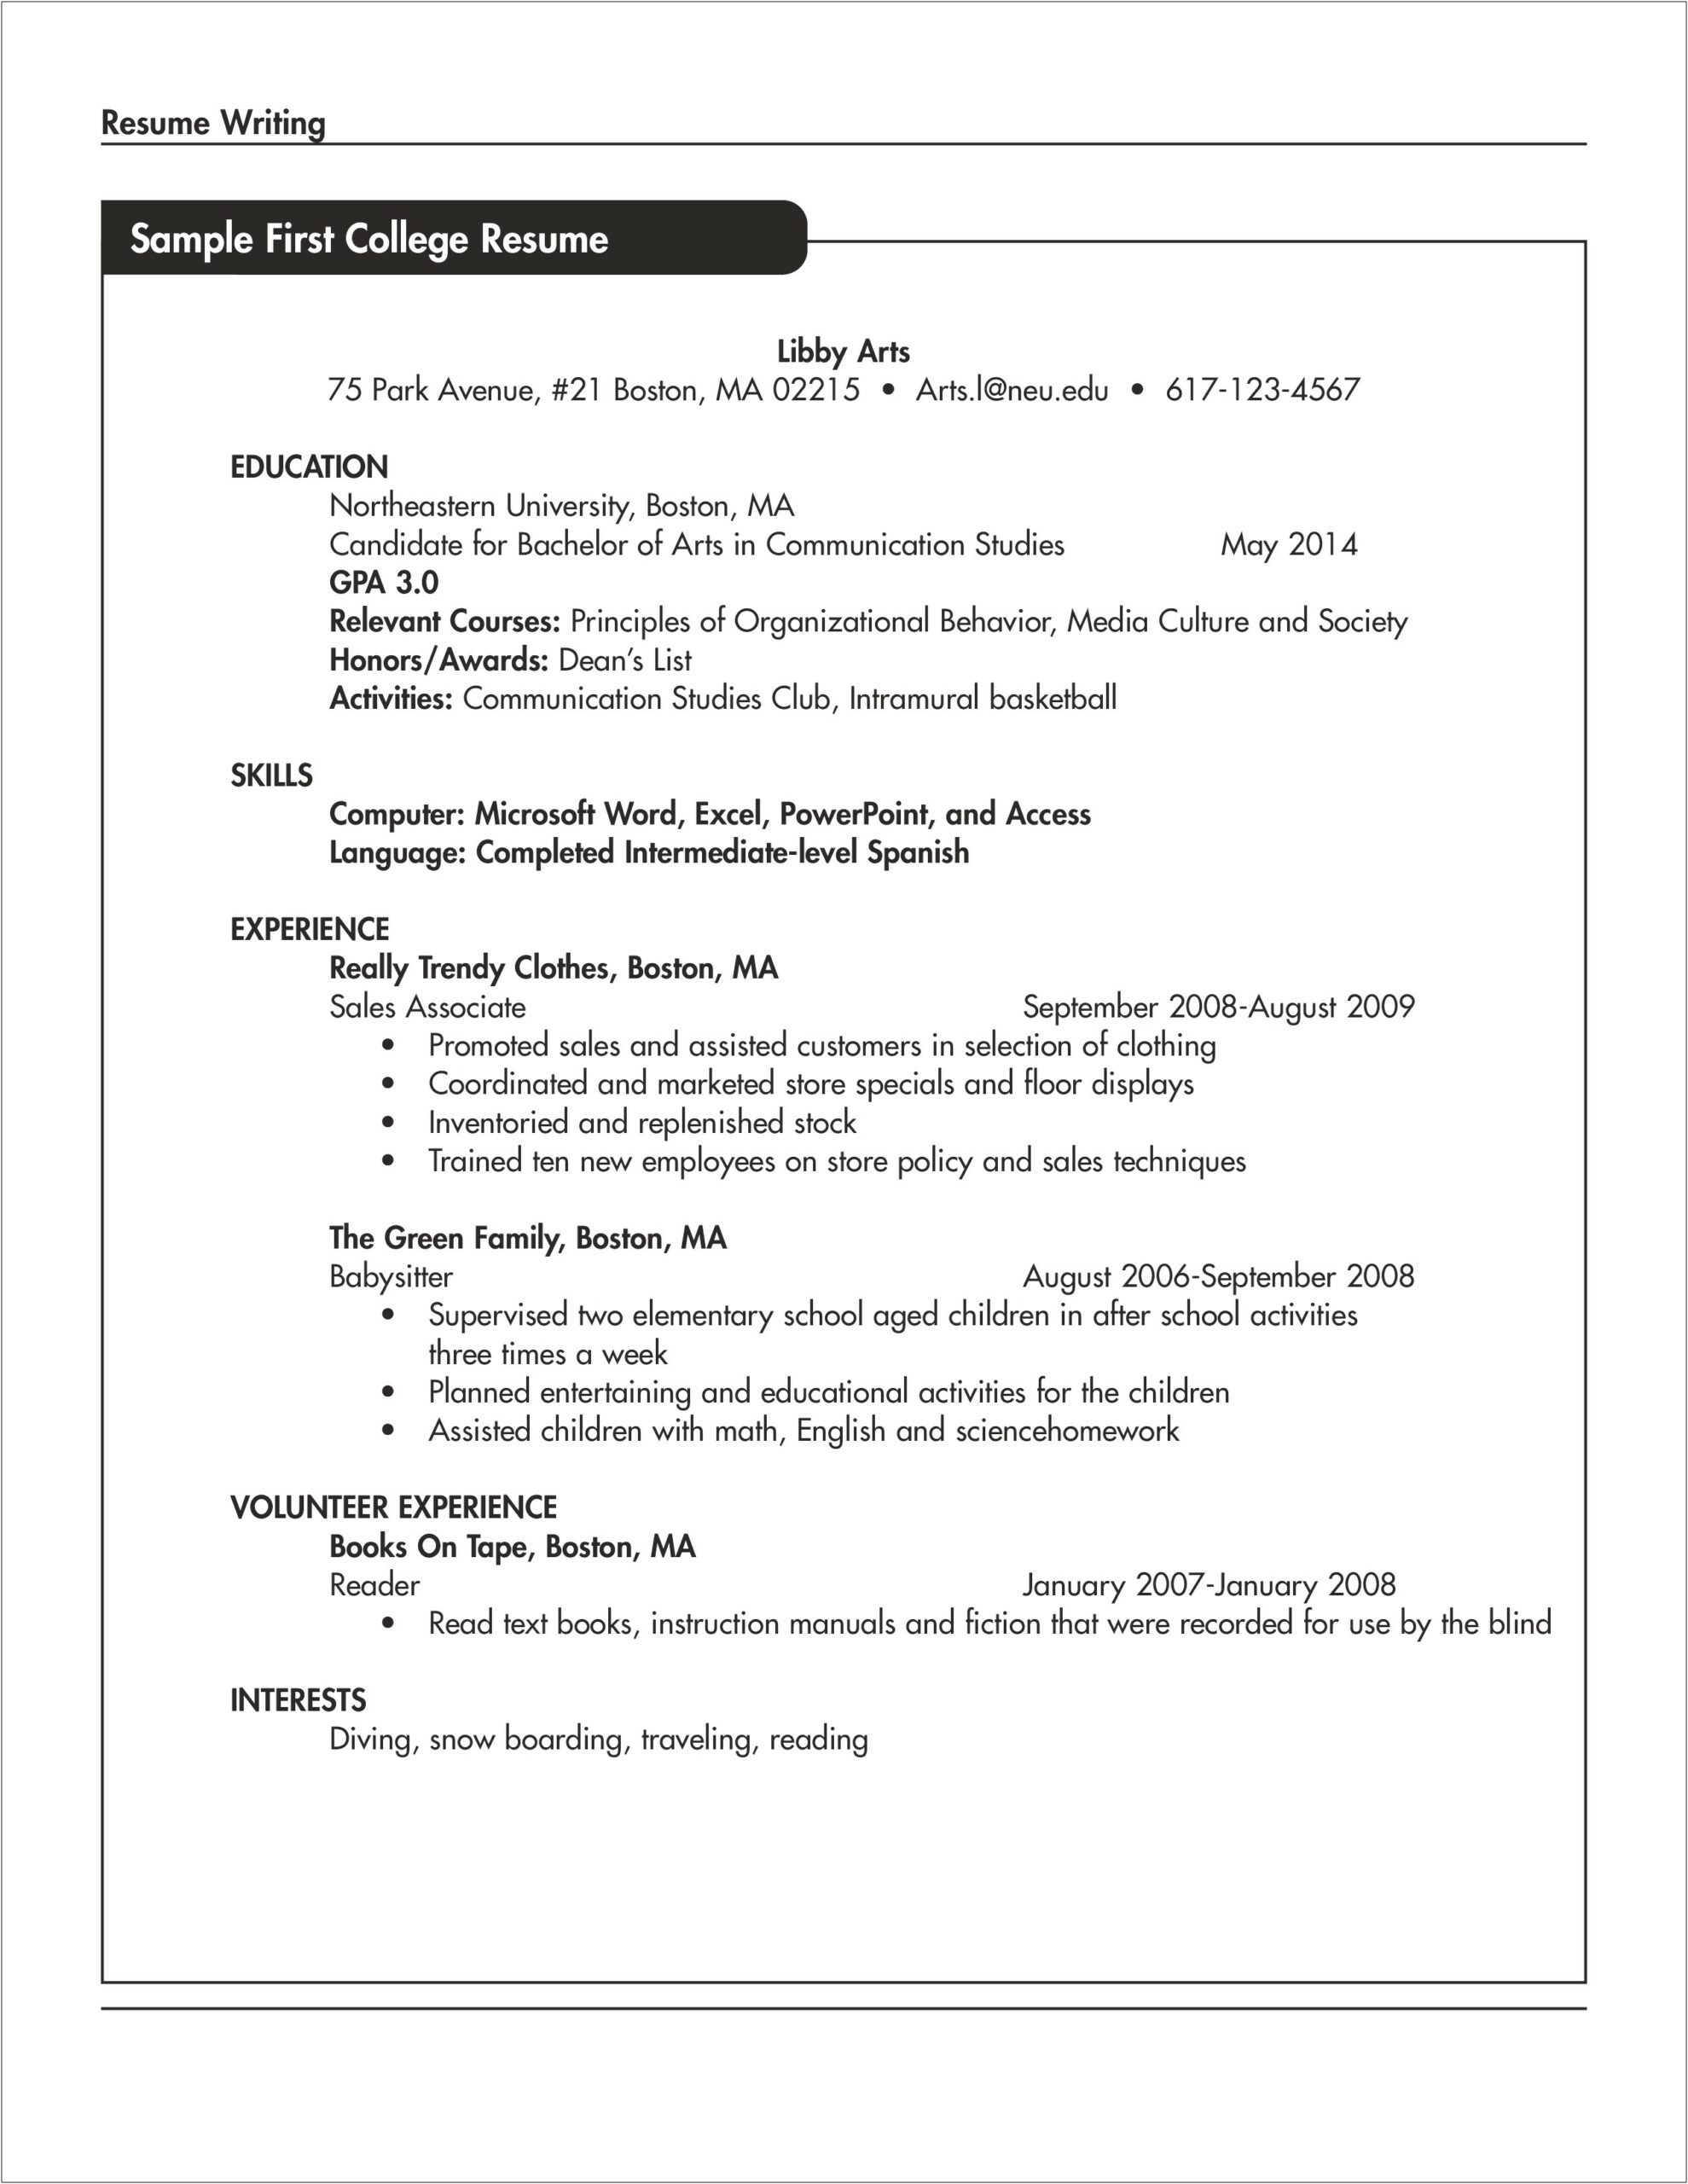 Employment Experience Example On Resume